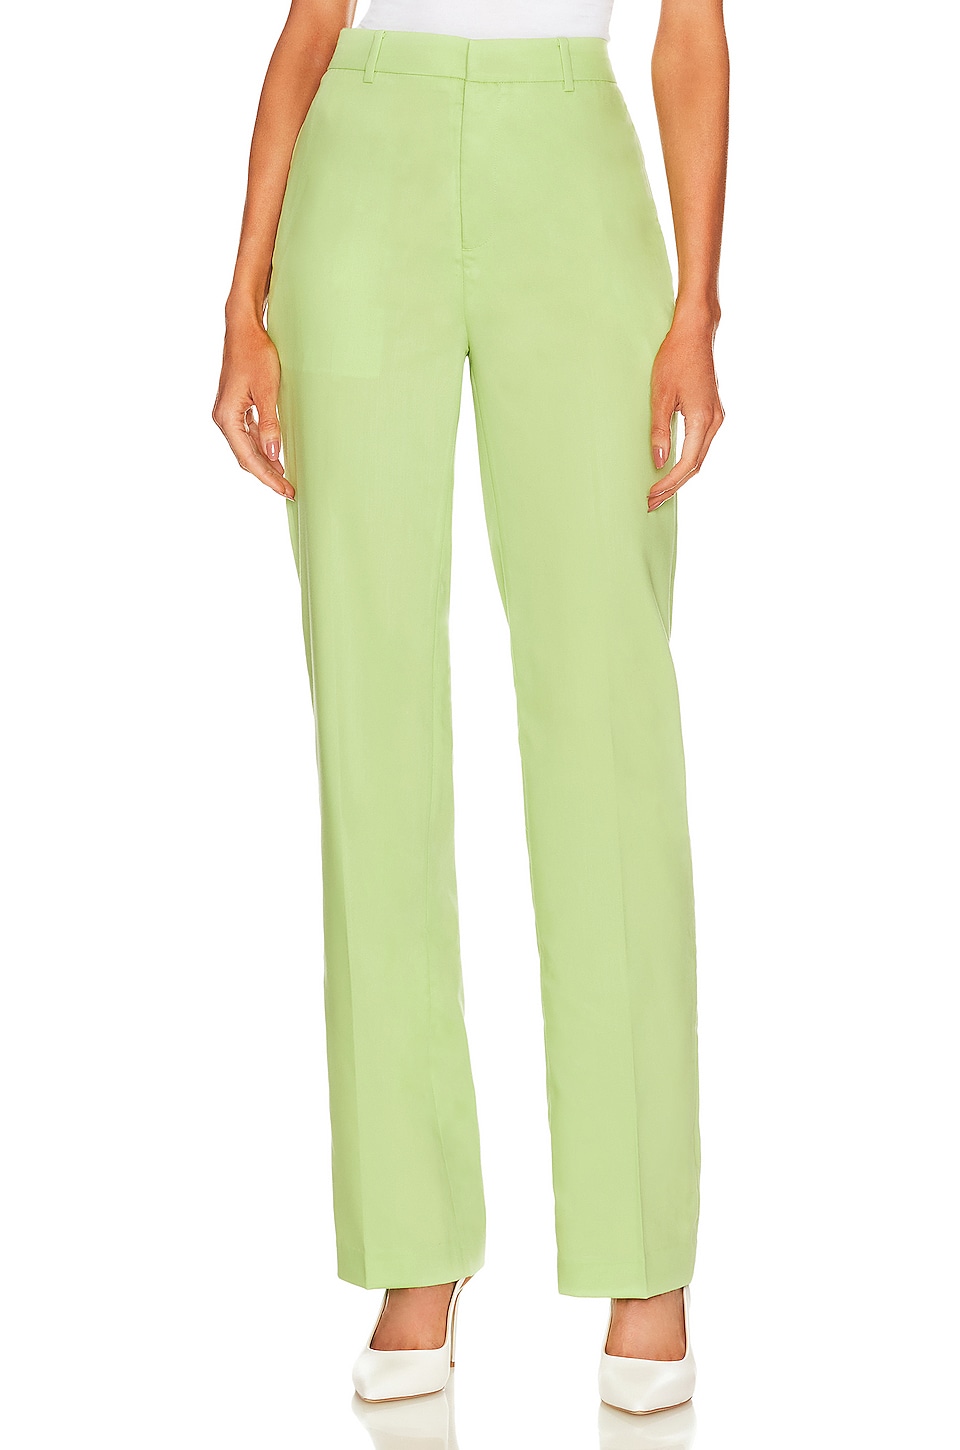 oracal 8500 f063 lime tree green 1 26x50 м Брюки L'Academie Ailill Trouser, цвет Lime Green